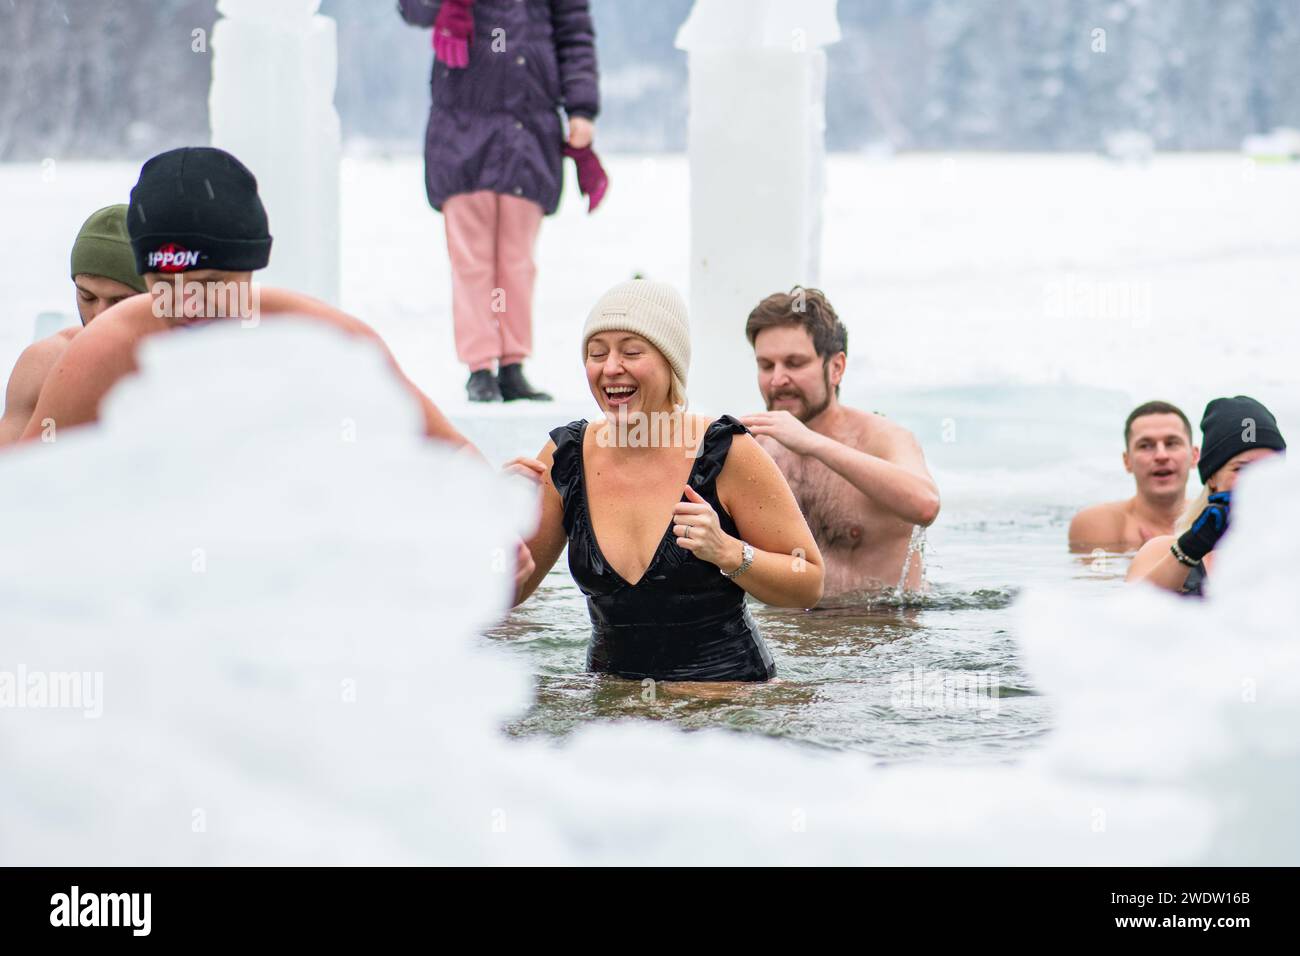 Group of people ice bathing together in the freezing cold water of a frozen lake. Wim Hof Method, cold therapy, breathing techniques, yoga Stock Photo